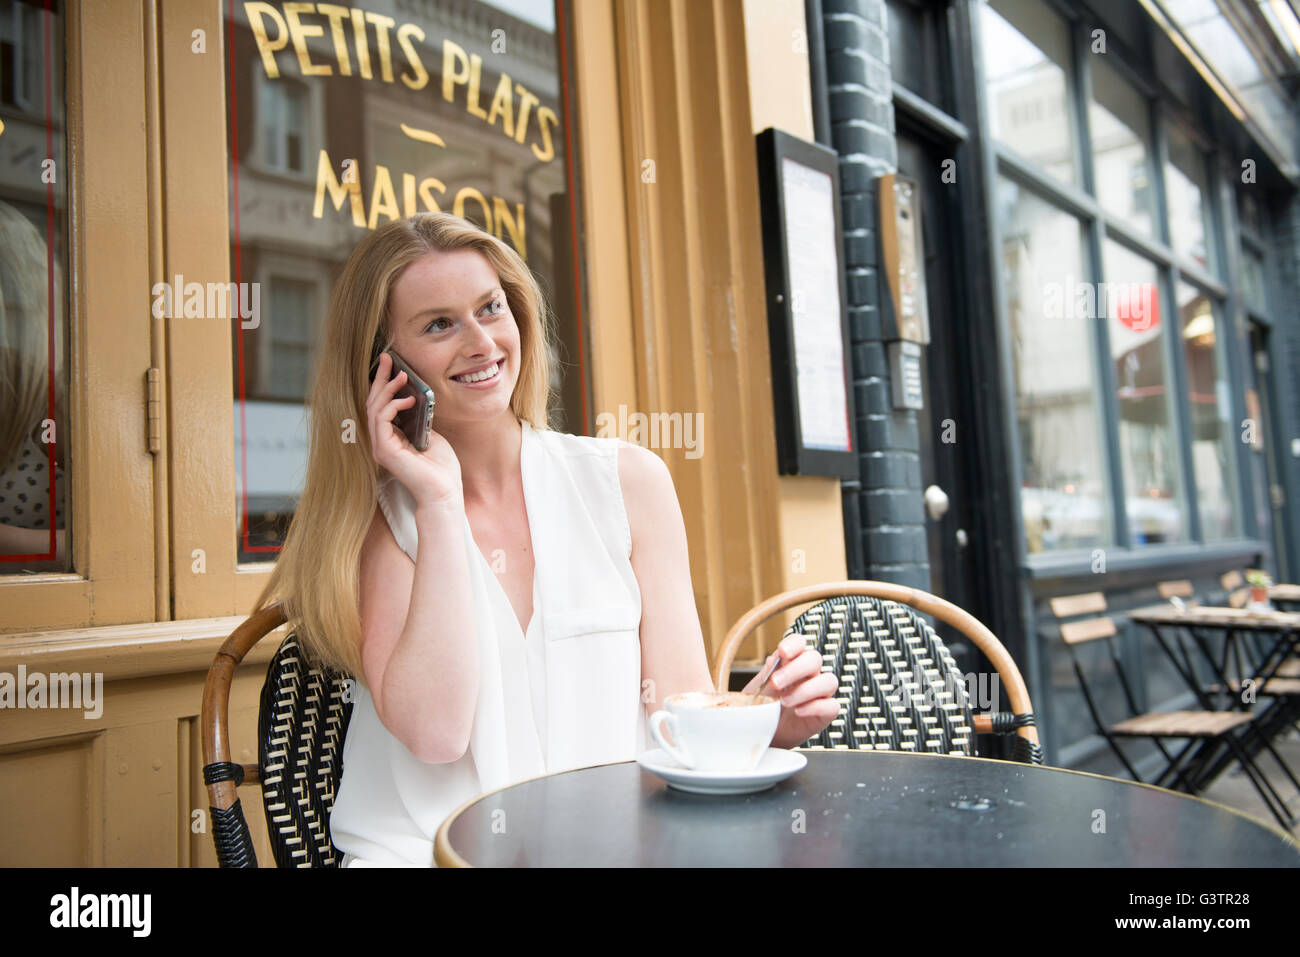 A young woman sitting outside a cafe on the phone in Covent Garden in London. Stock Photo